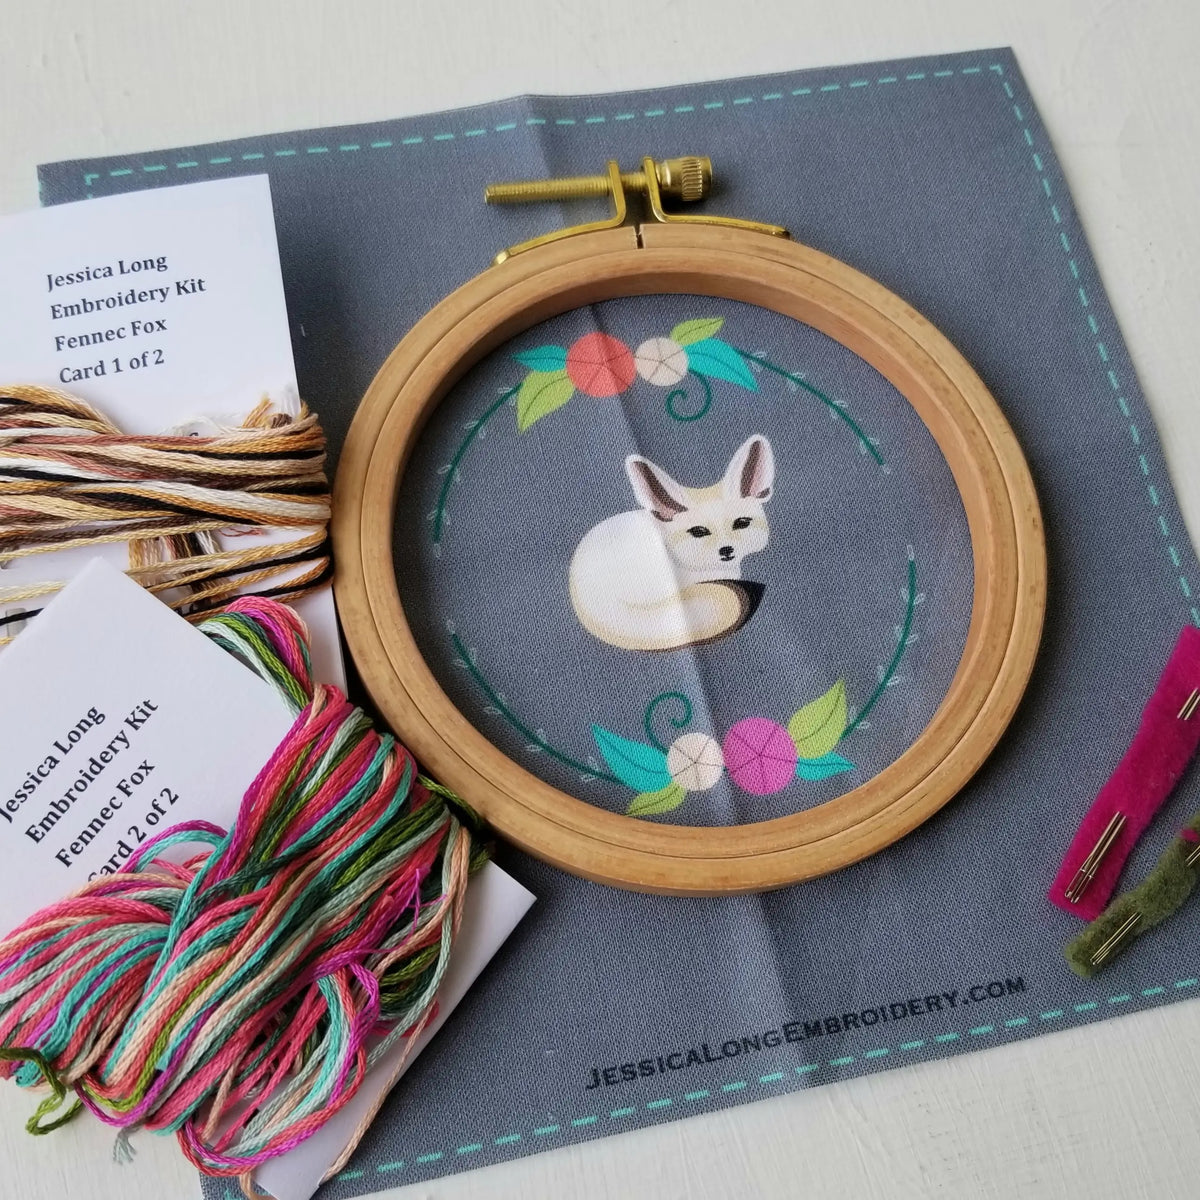 Fennec Fox Hand Embroidery Kit